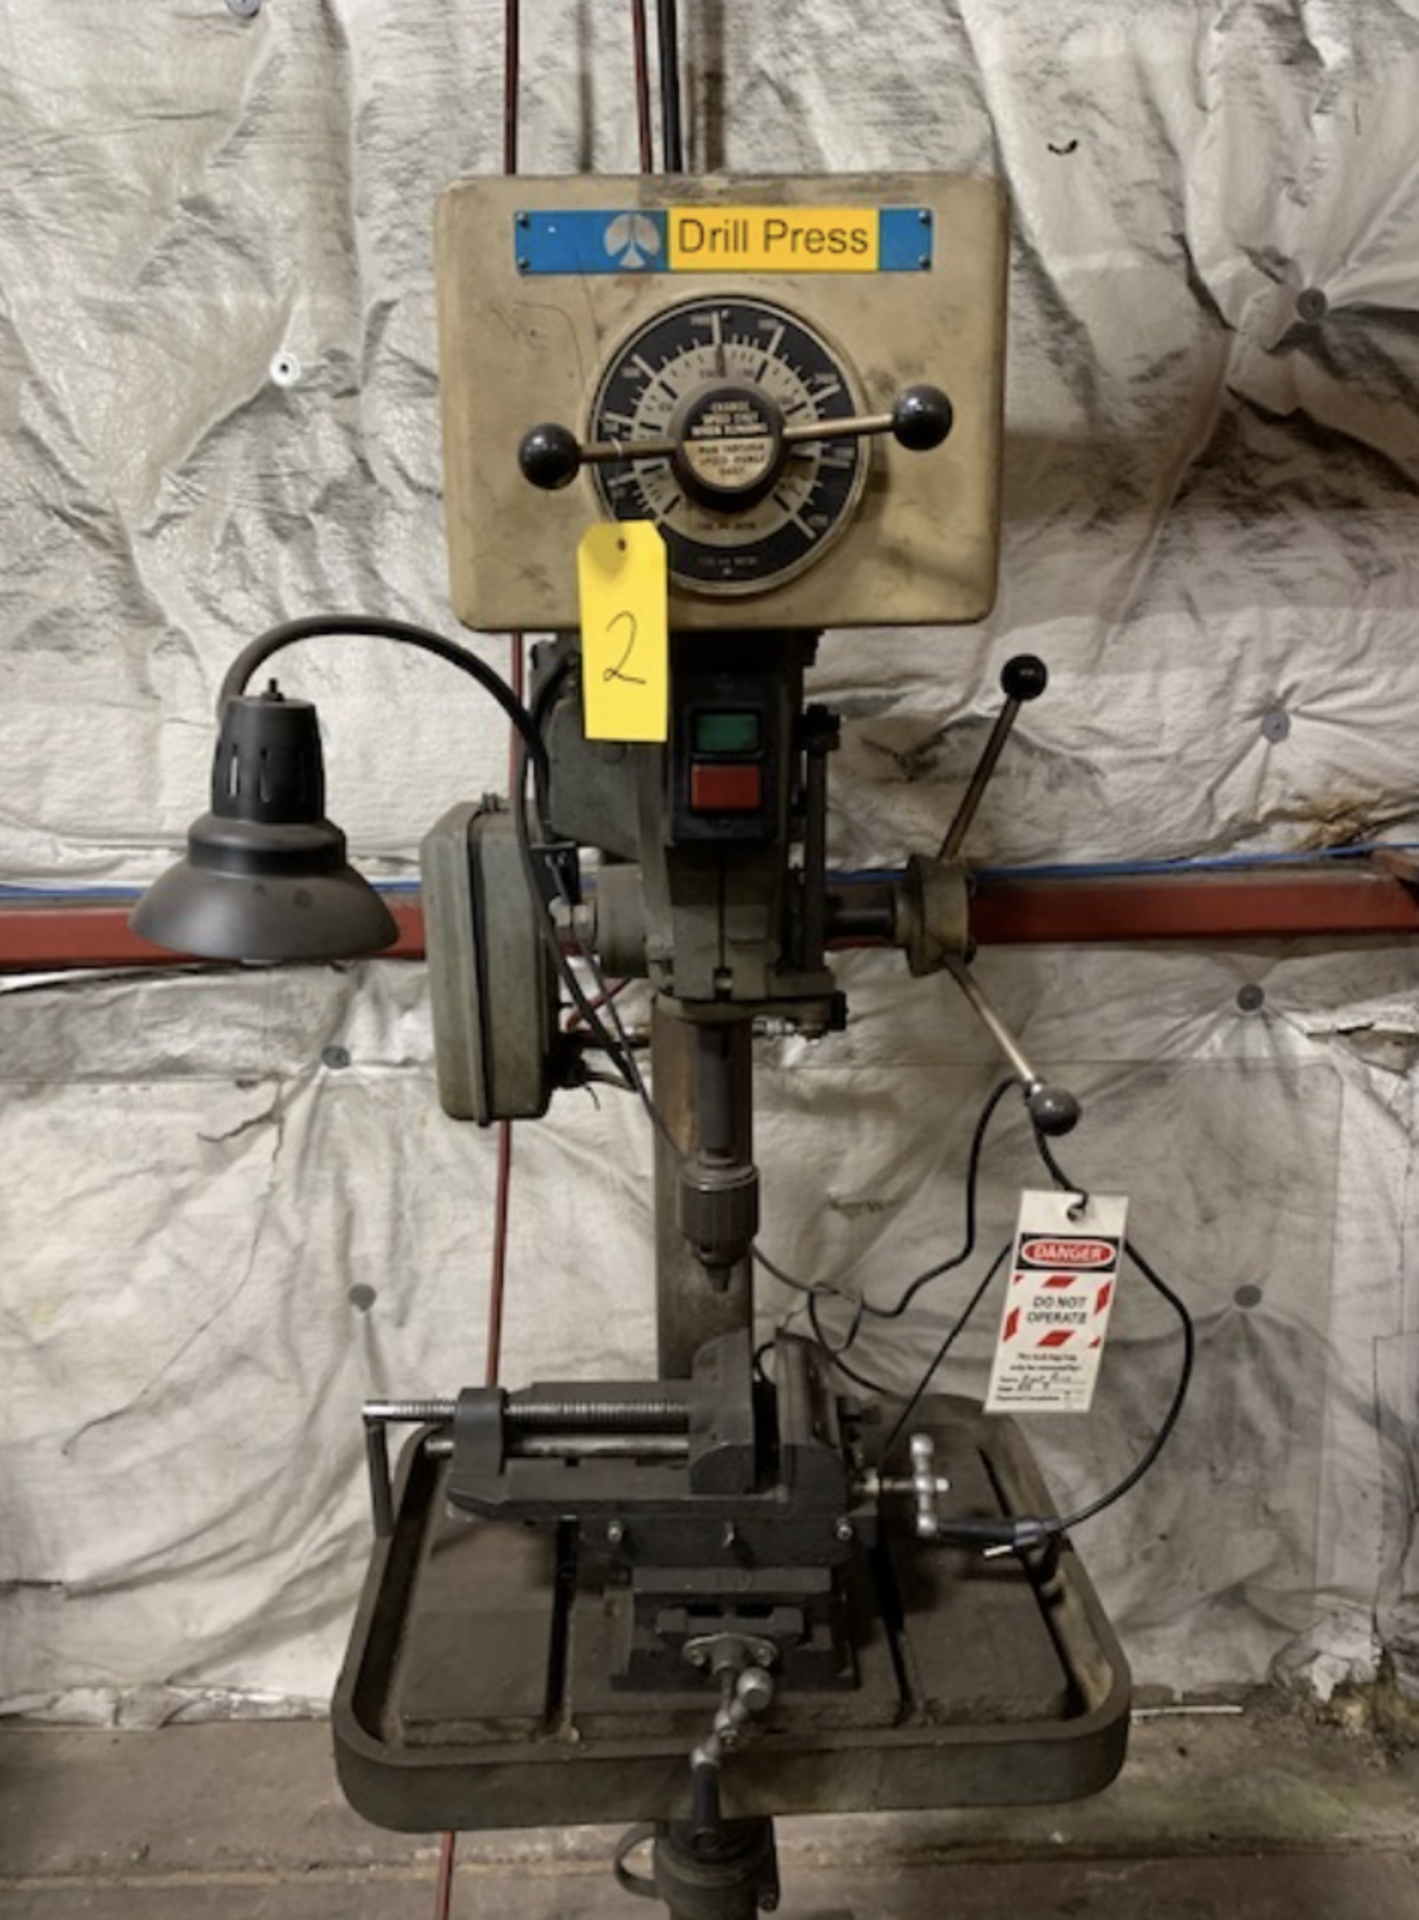 ROCKWELL DRILL PRESS (MUST BE REMOVED BY DECEMBER 28)